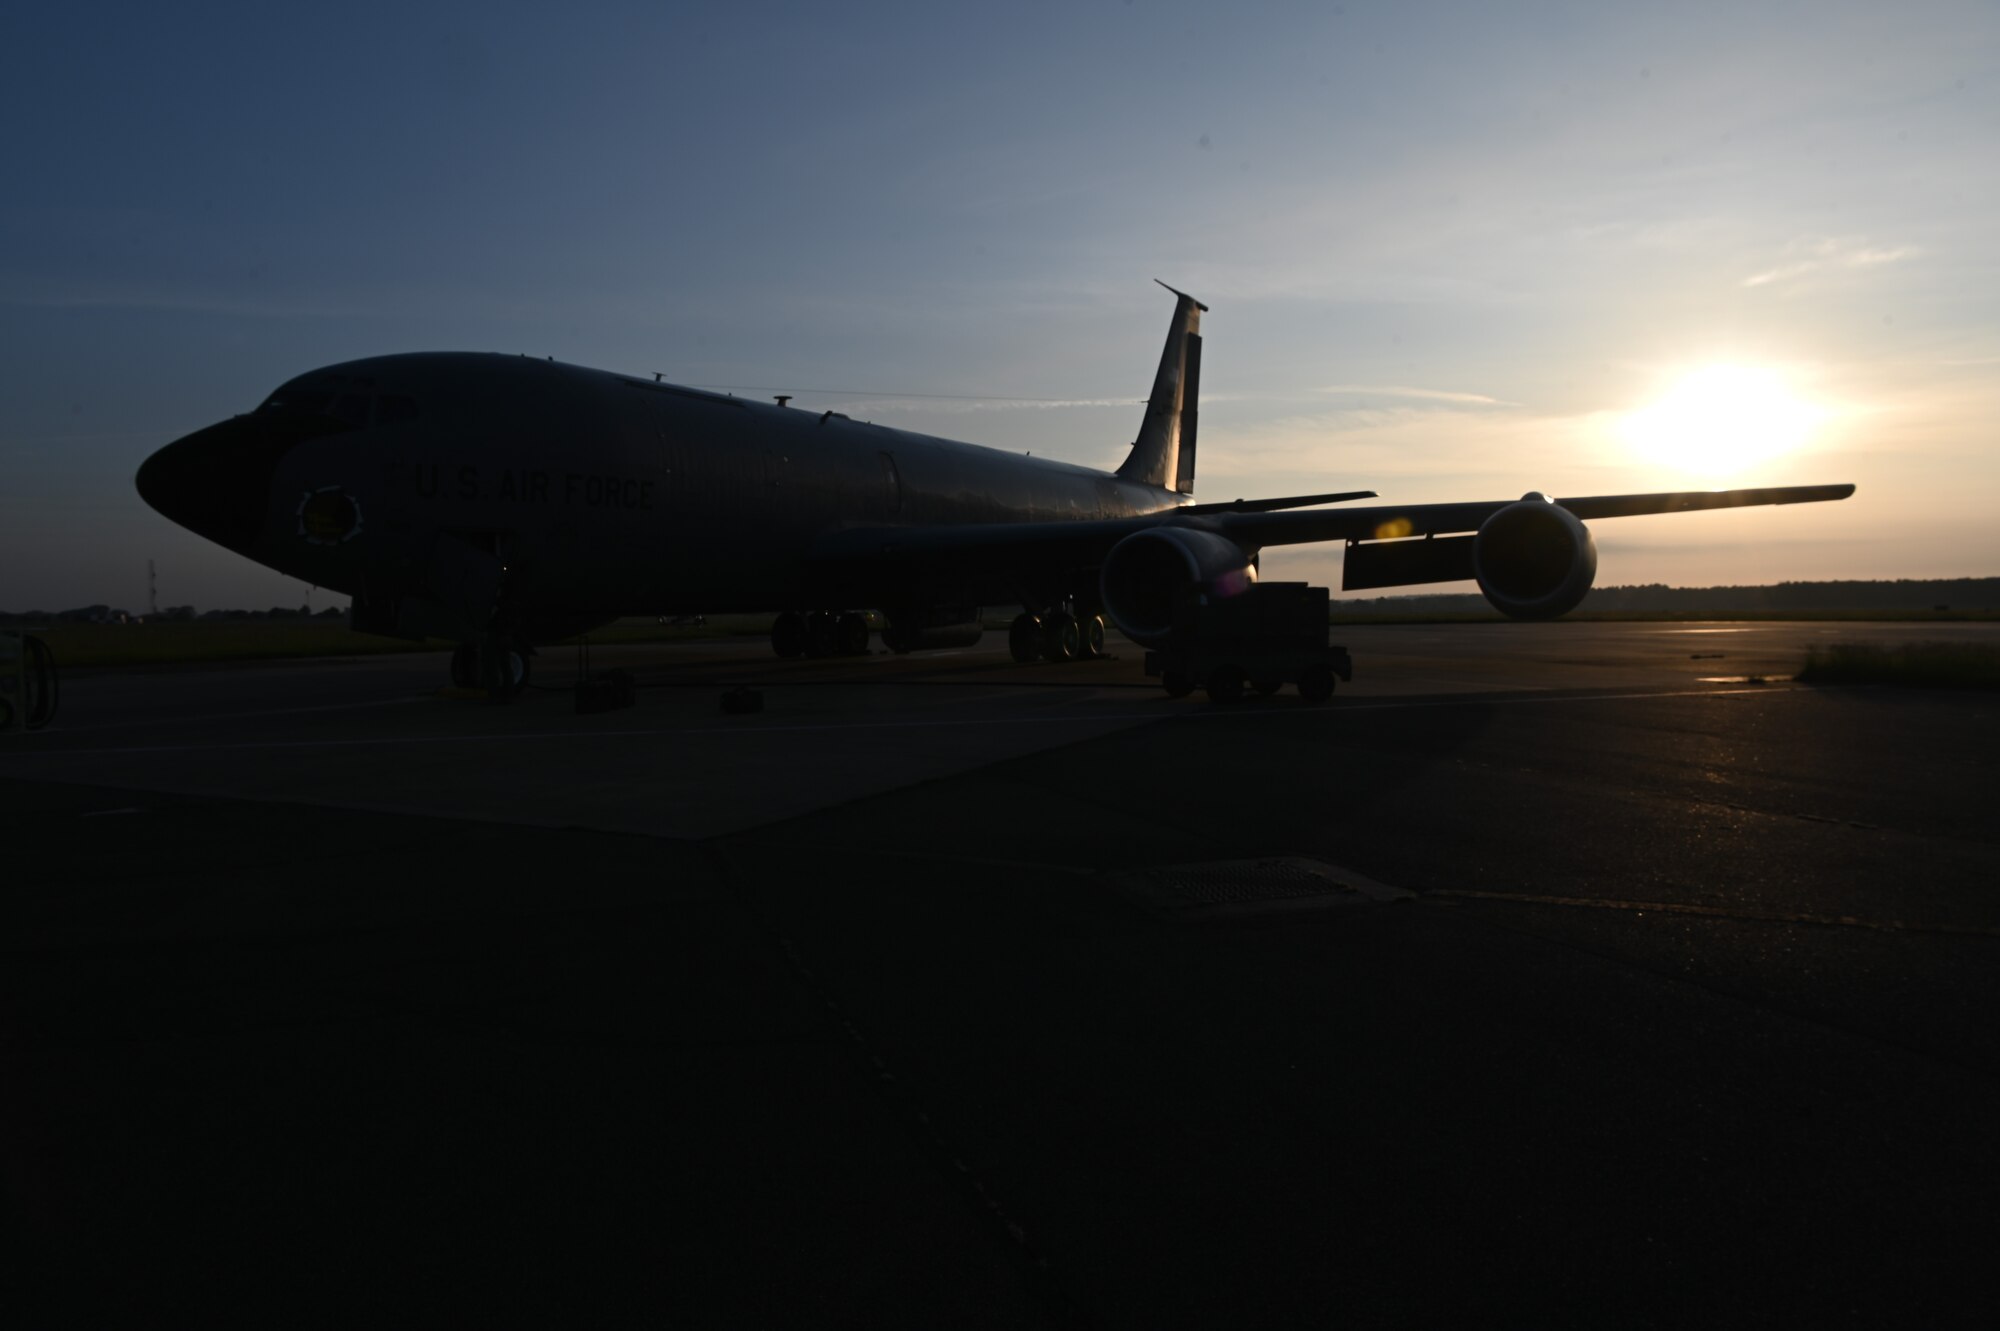 A KC-135 Stratotanker assigned to the 351st Air Refueling Squadron sits on the hardstand prior to takeoff at Royal Air Force Mildenhall, England, June 4, 2021. The 351st ARS flew over Omaha Beach, France, to honor Charles Norman Shay who served in the first wave attack on the beach. (U.S. Air Force photo by Staff Sgt. Matthew J. Wisher